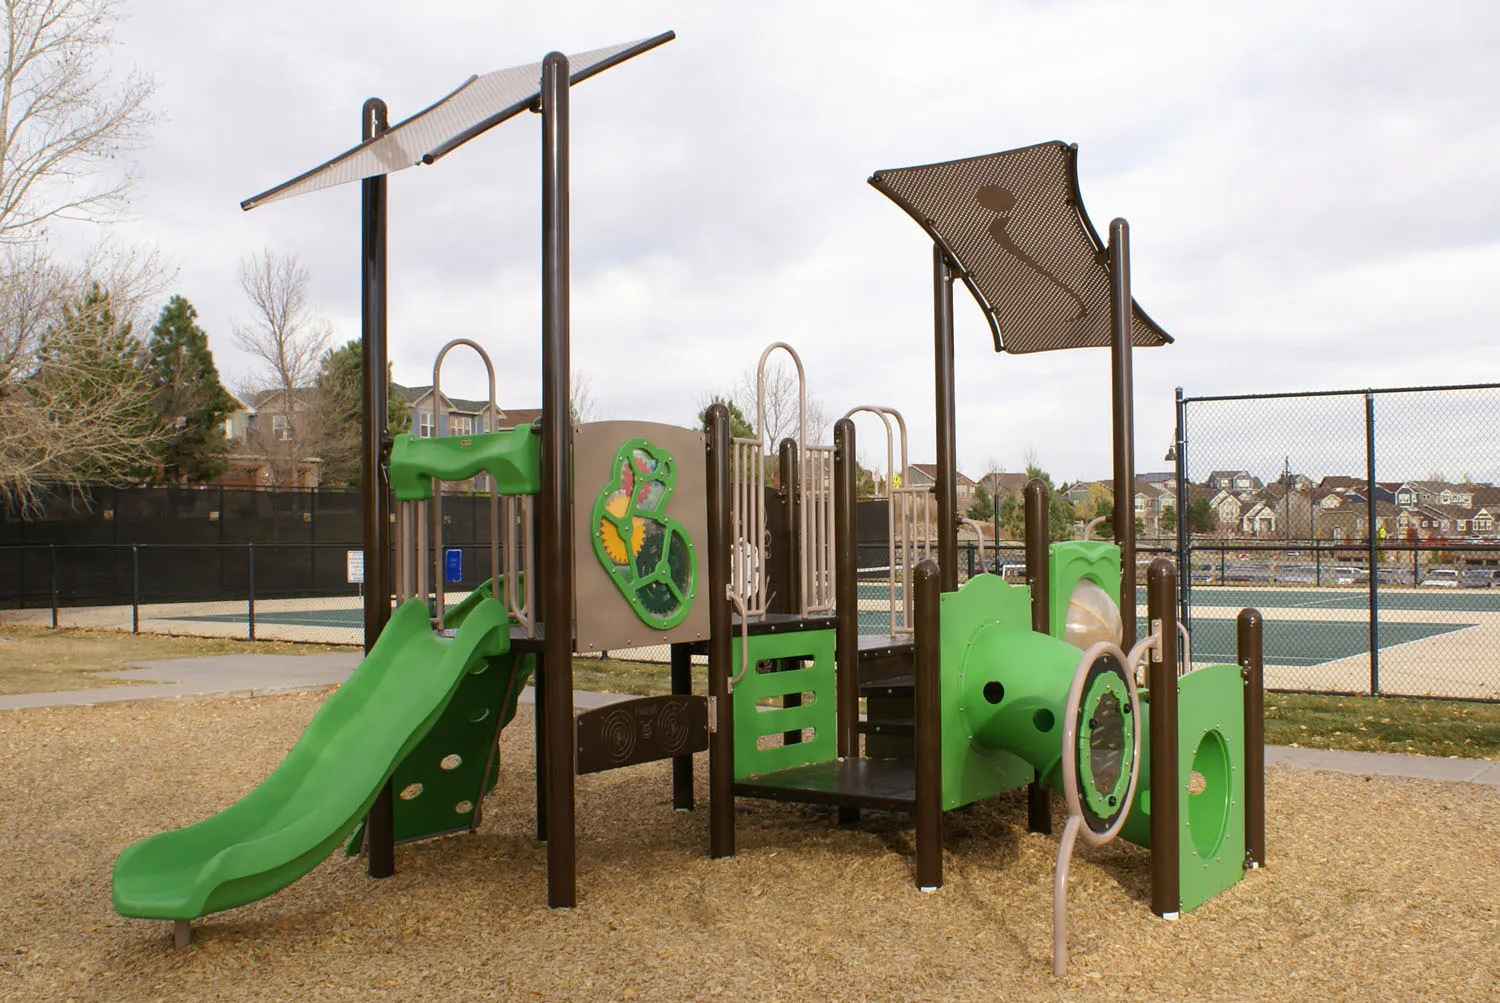 Toddler playground equipment that is age appropriate at Tallyns Reach Park 